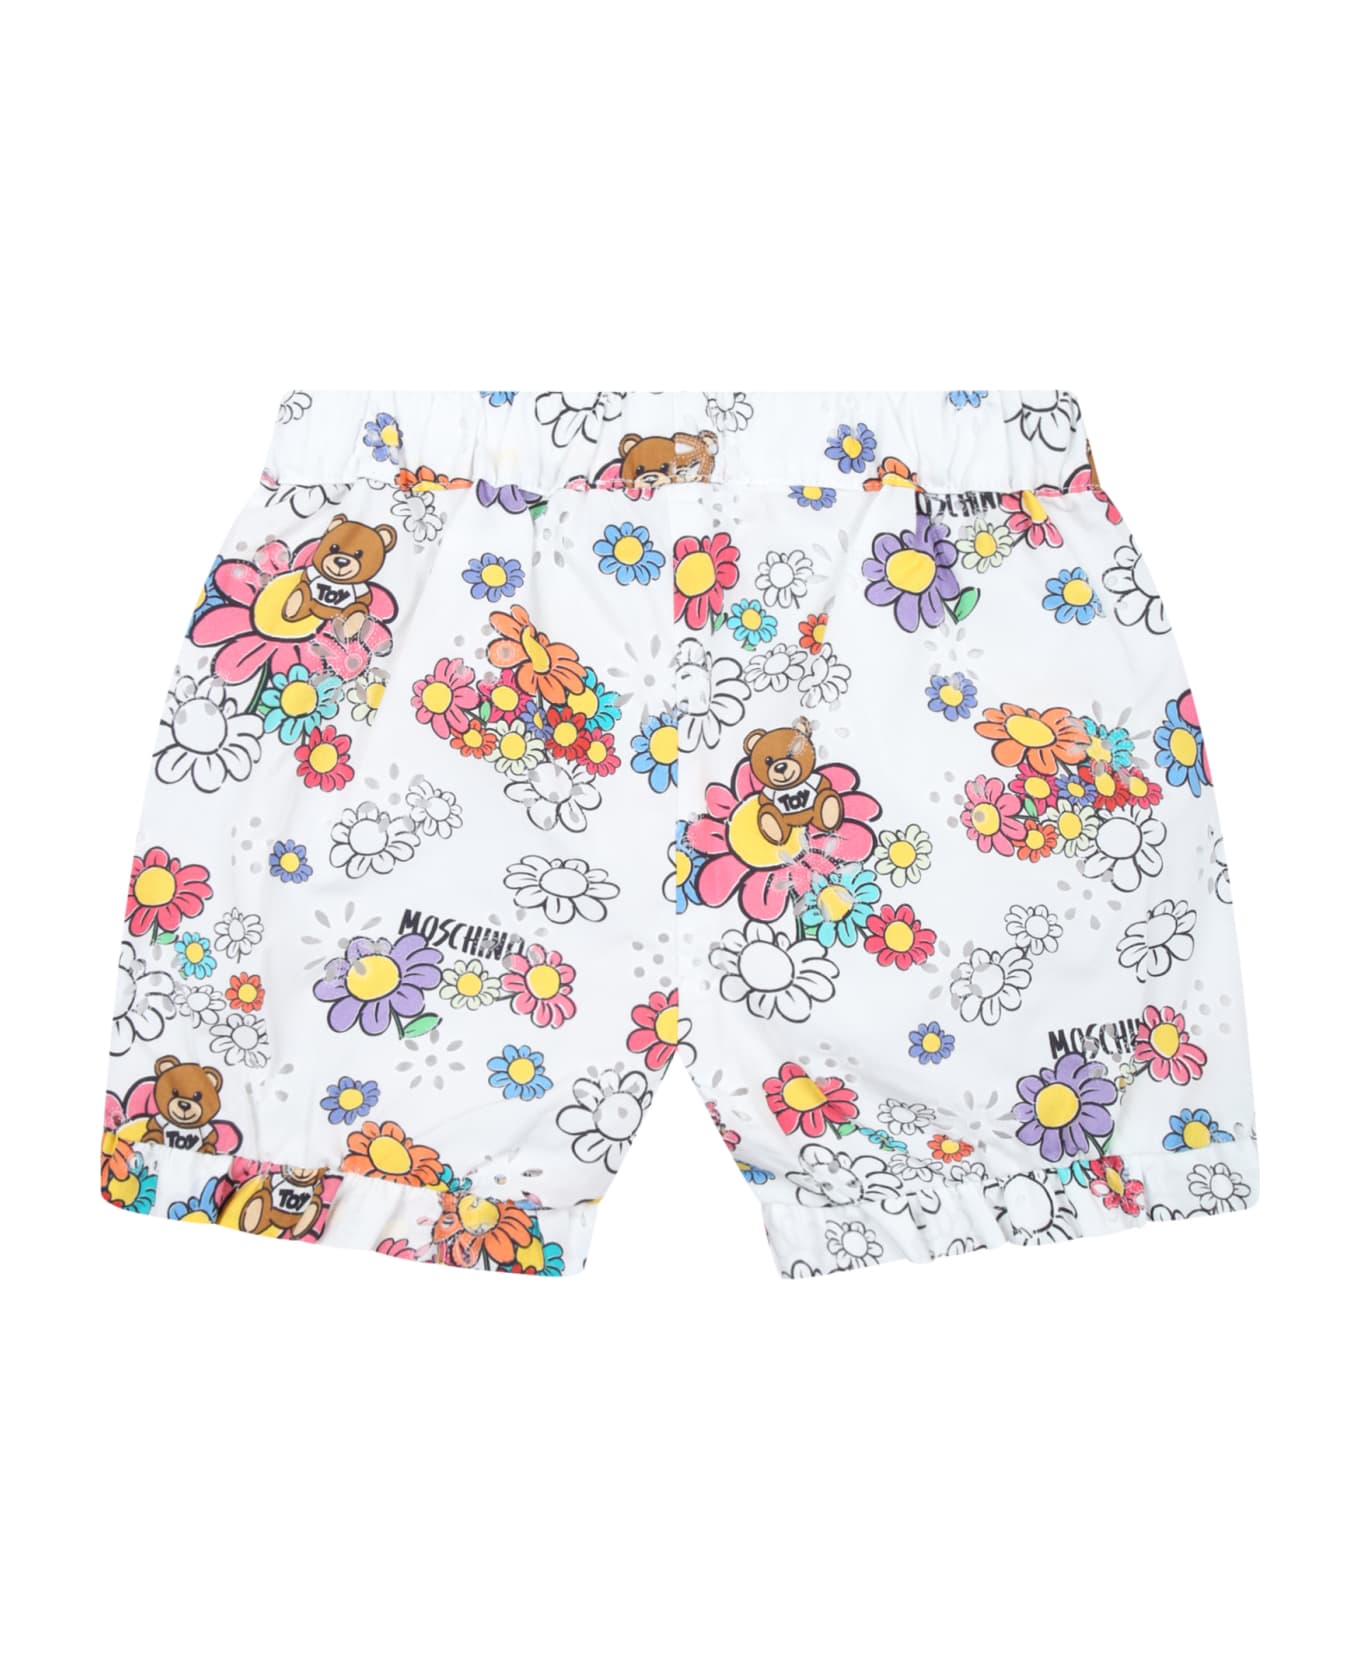 Moschino White Shorts For Baby Girl With Flowers And Teddy Bear - White